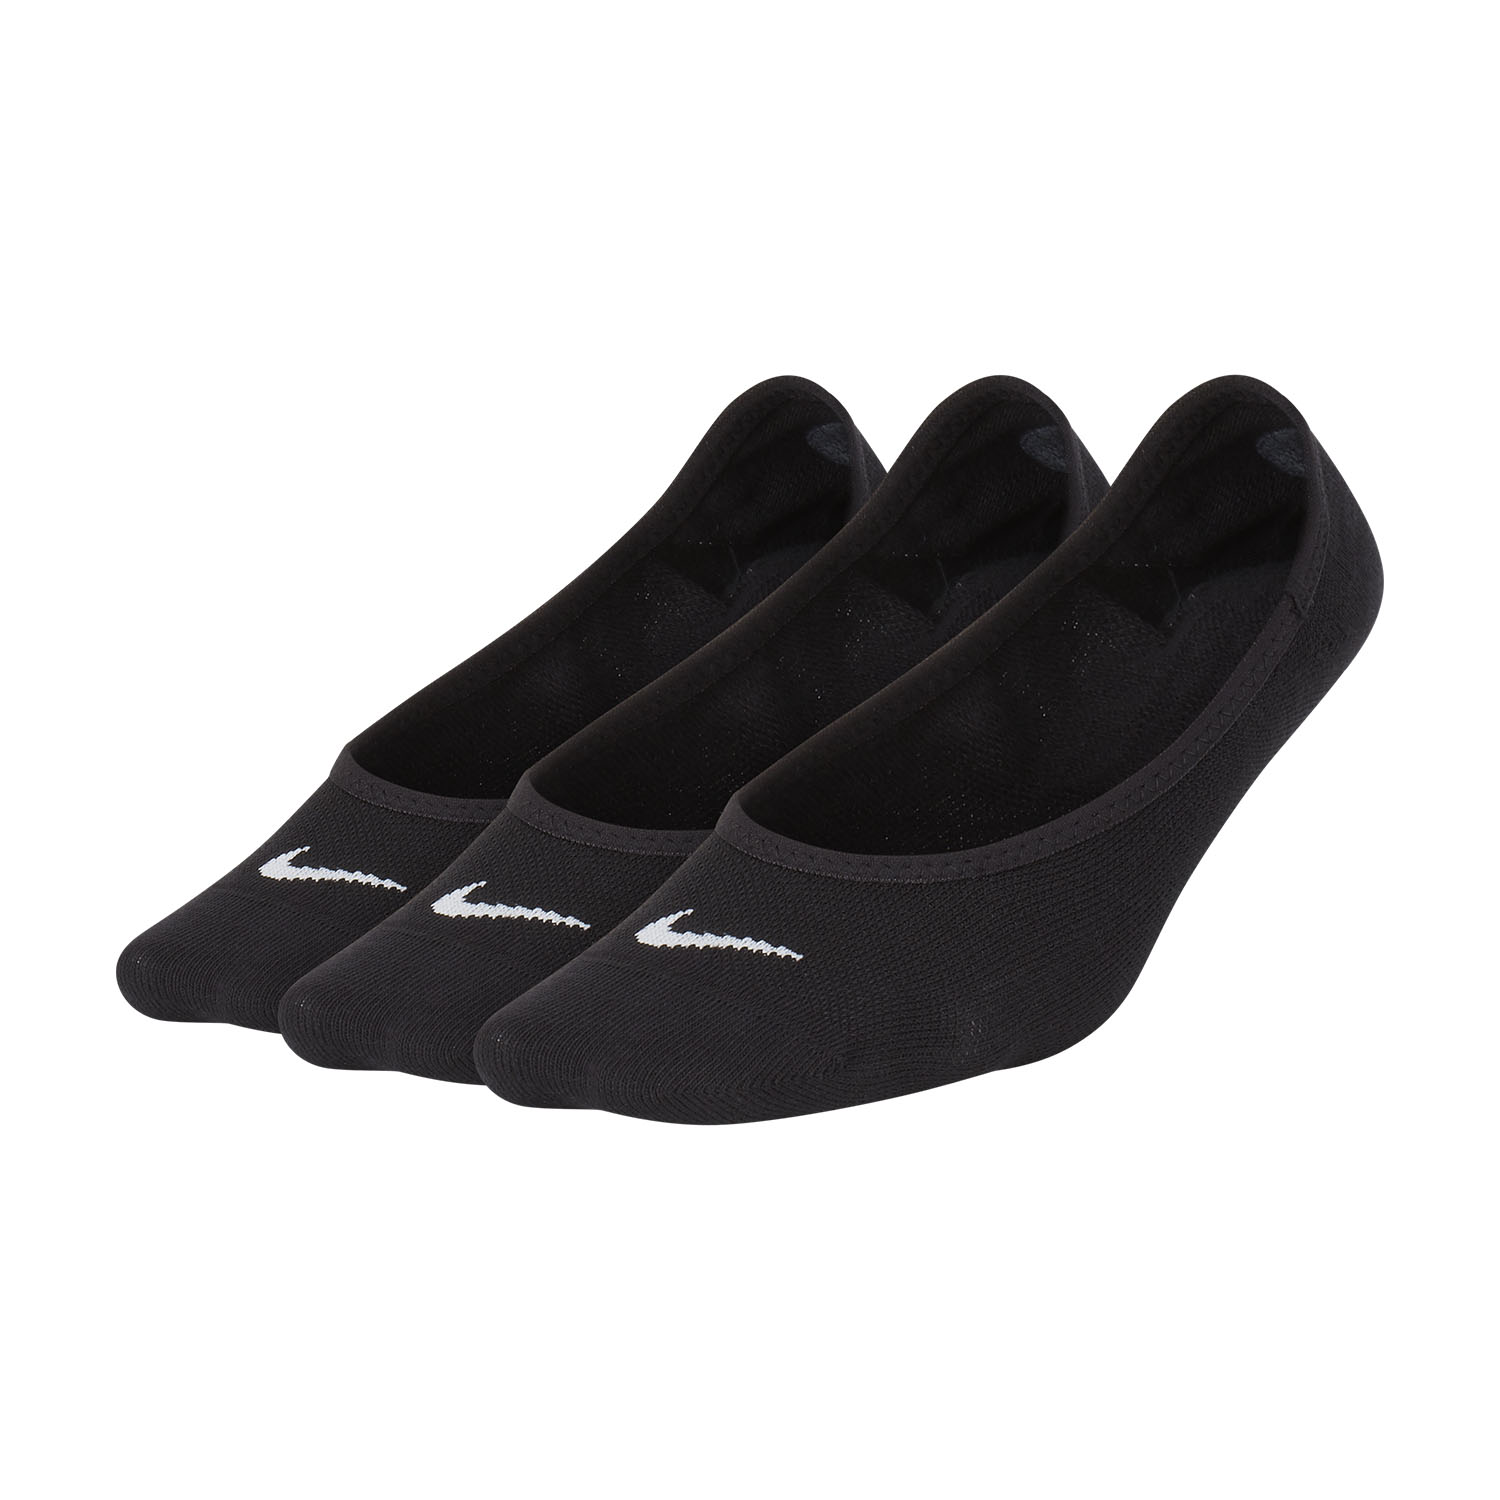 Nike Everyday Lightweight Footie x 3 Calcetines - Black/White